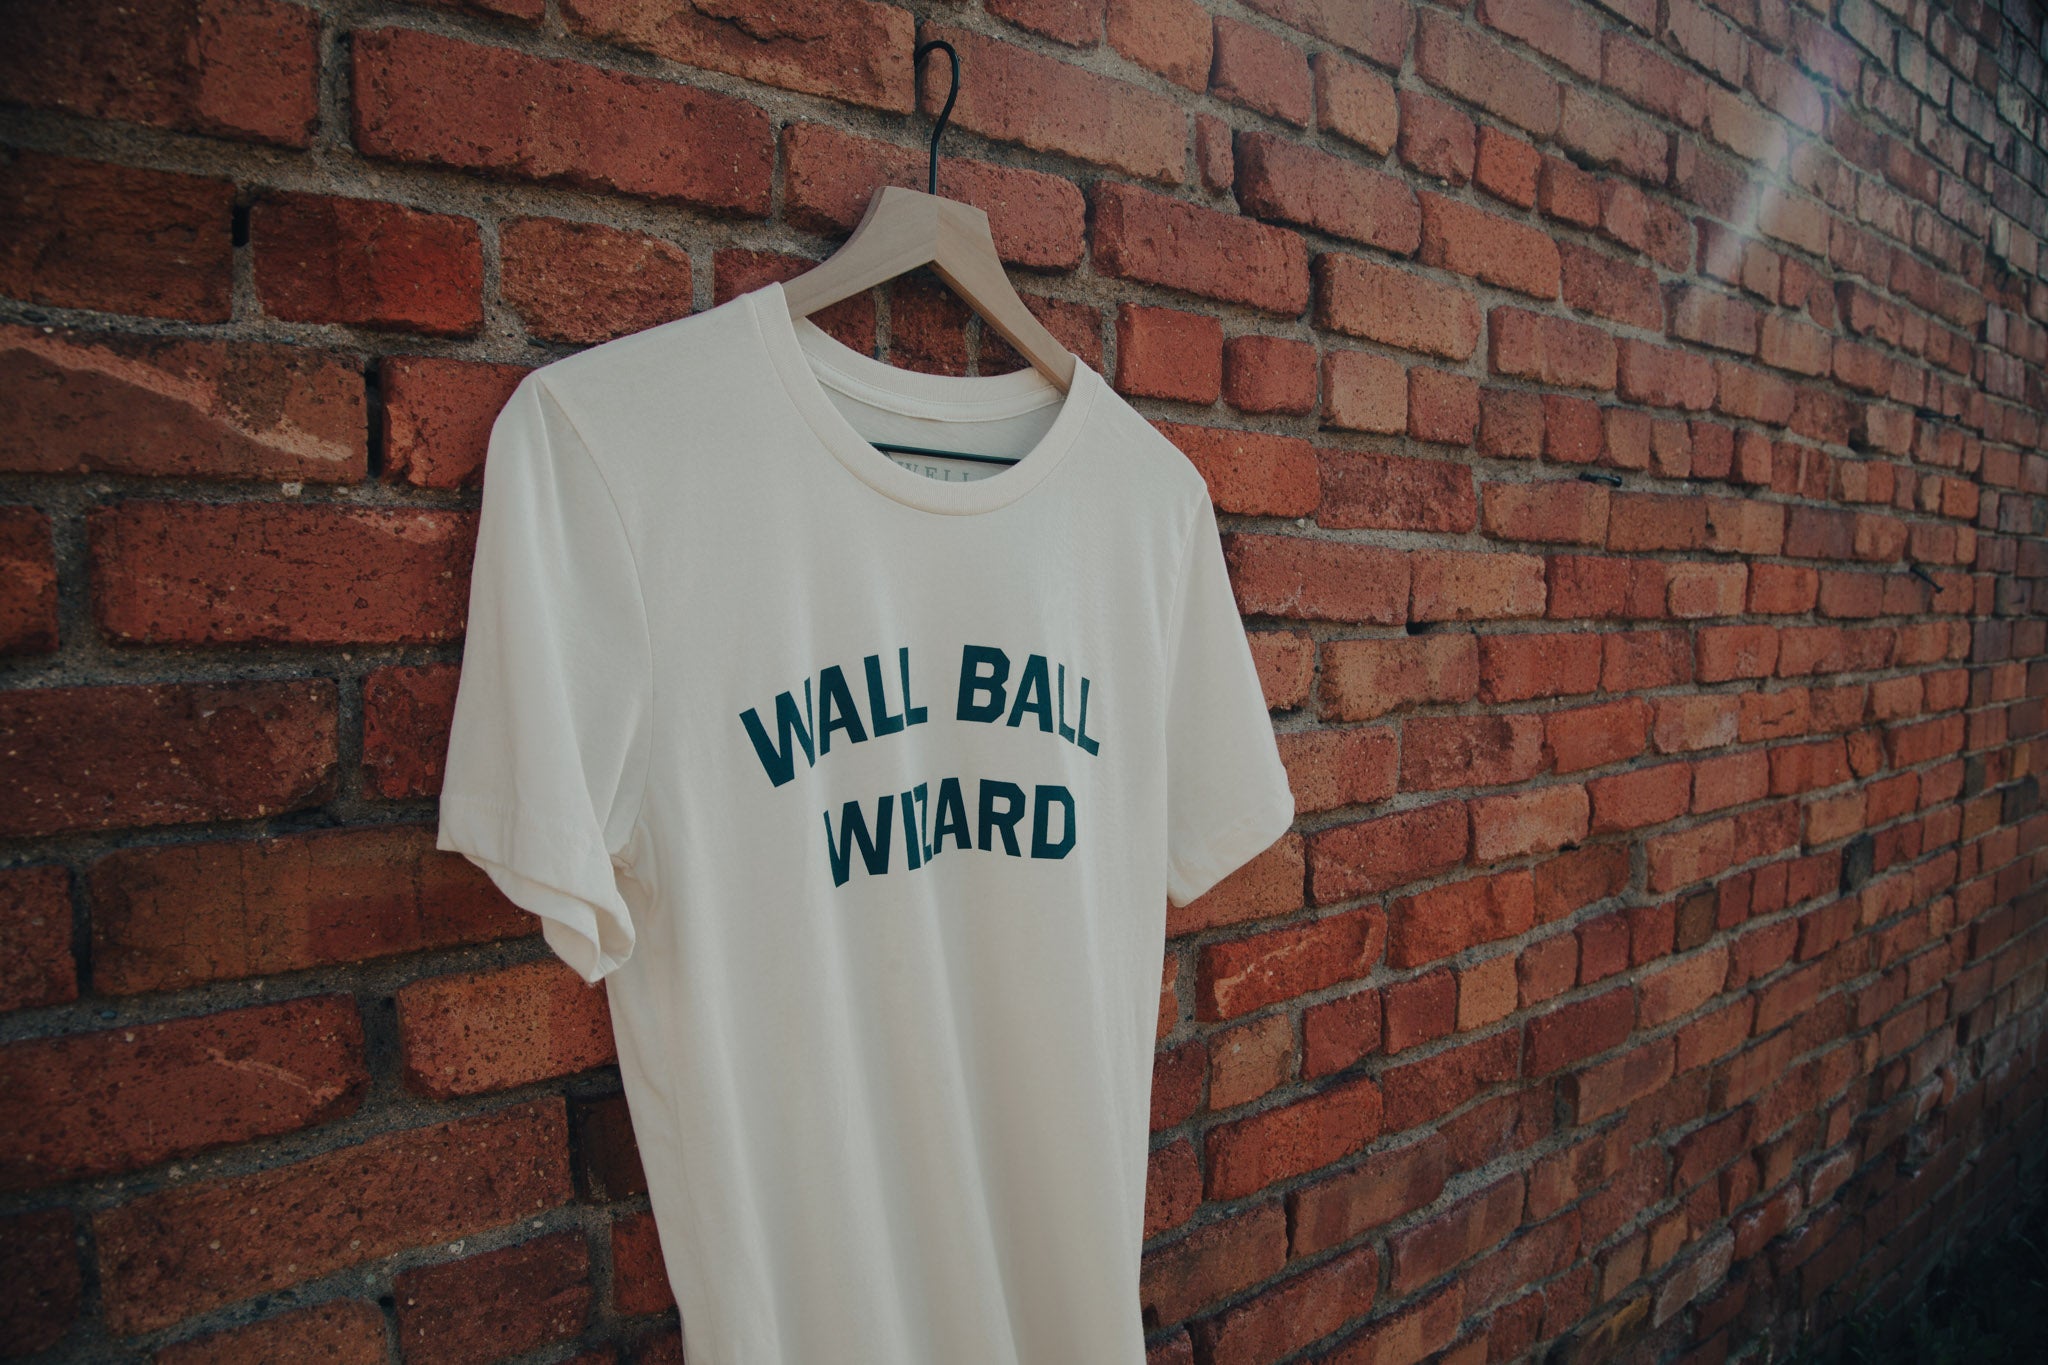 The Wall Ball Wizard